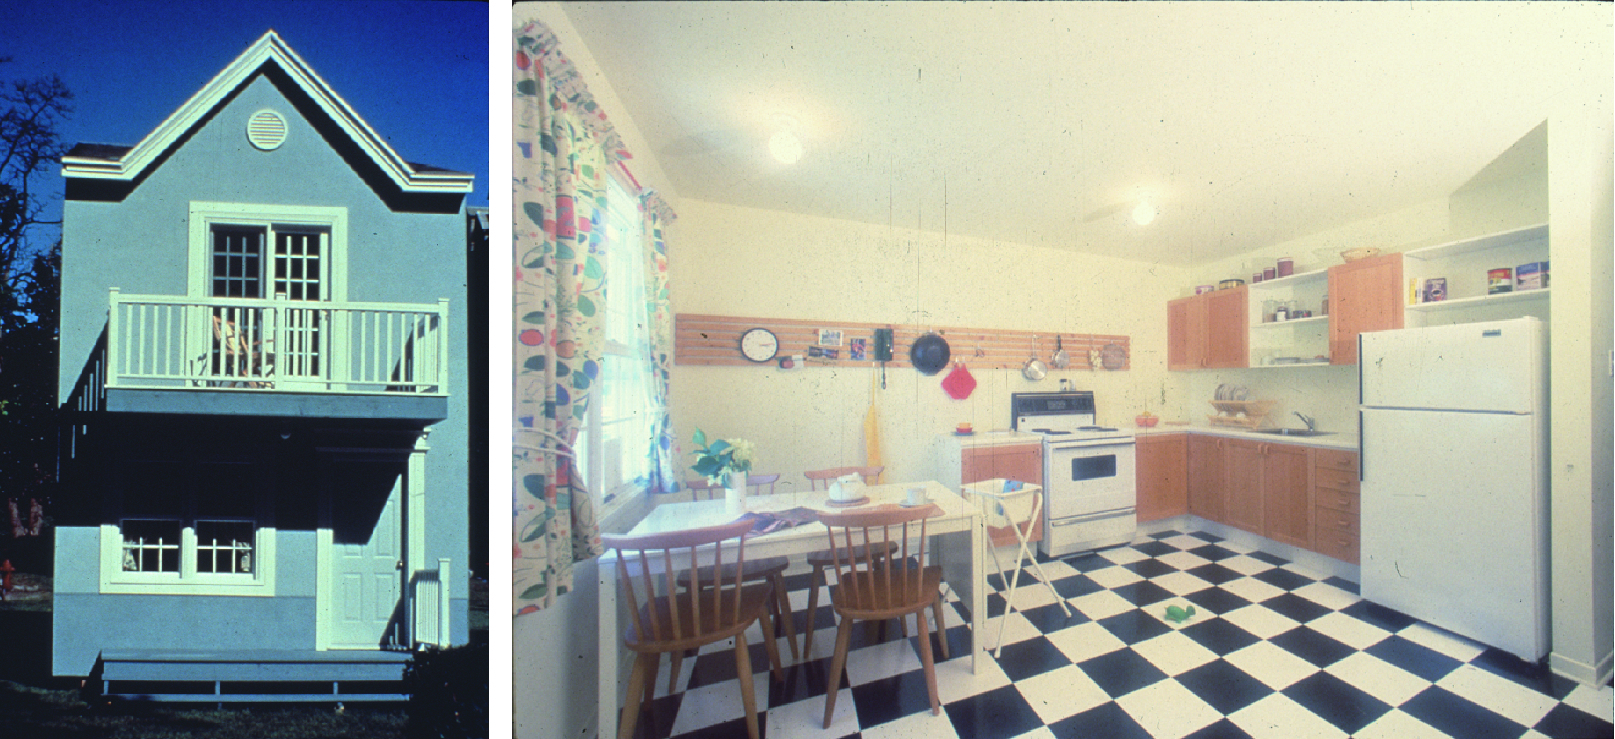 Left: photo of the front. Right: photo of the kitchen.